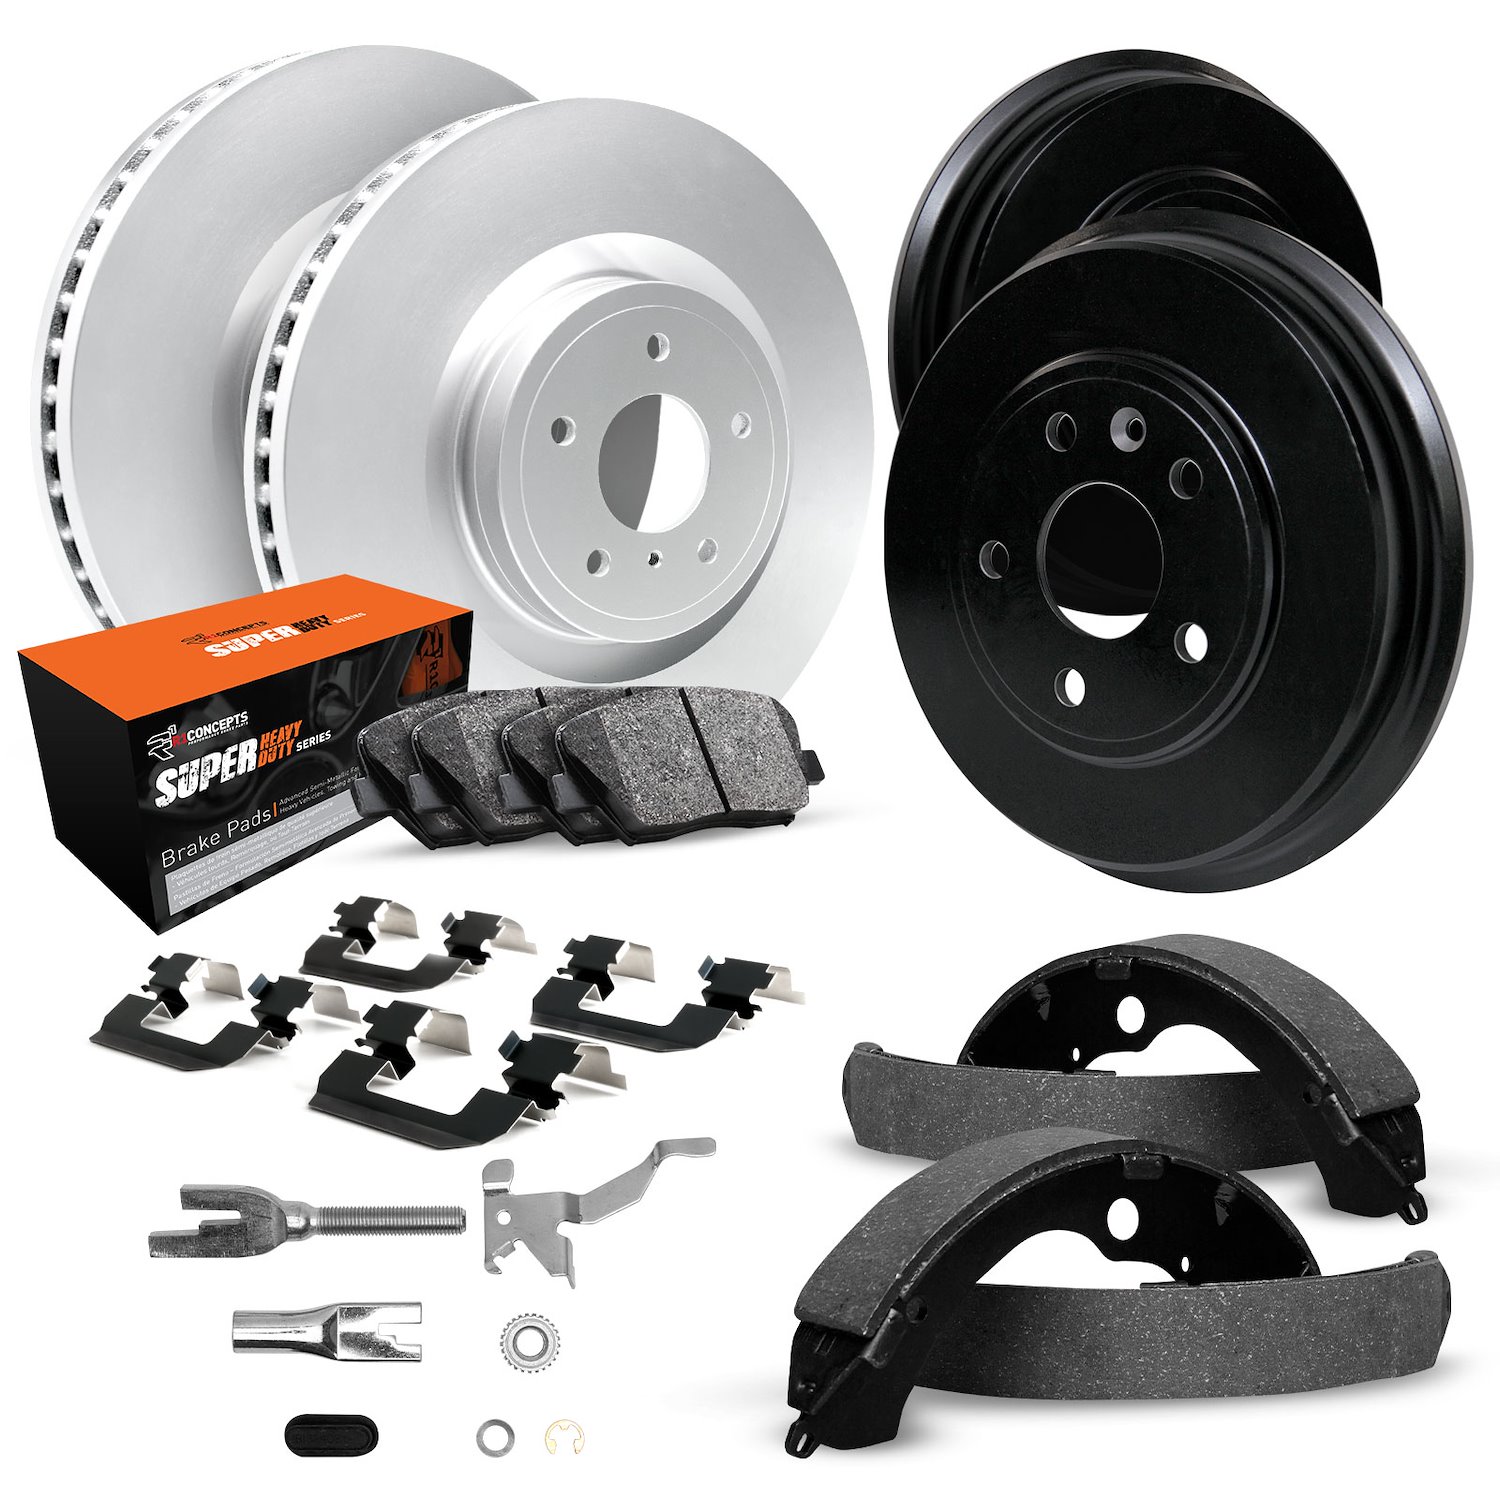 GEO-Carbon Brake Rotor & Drum Set w/Super-Duty Pads, Shoes, Hardware/Adjusters, 1994-1995 GM, Position: Front & Rear